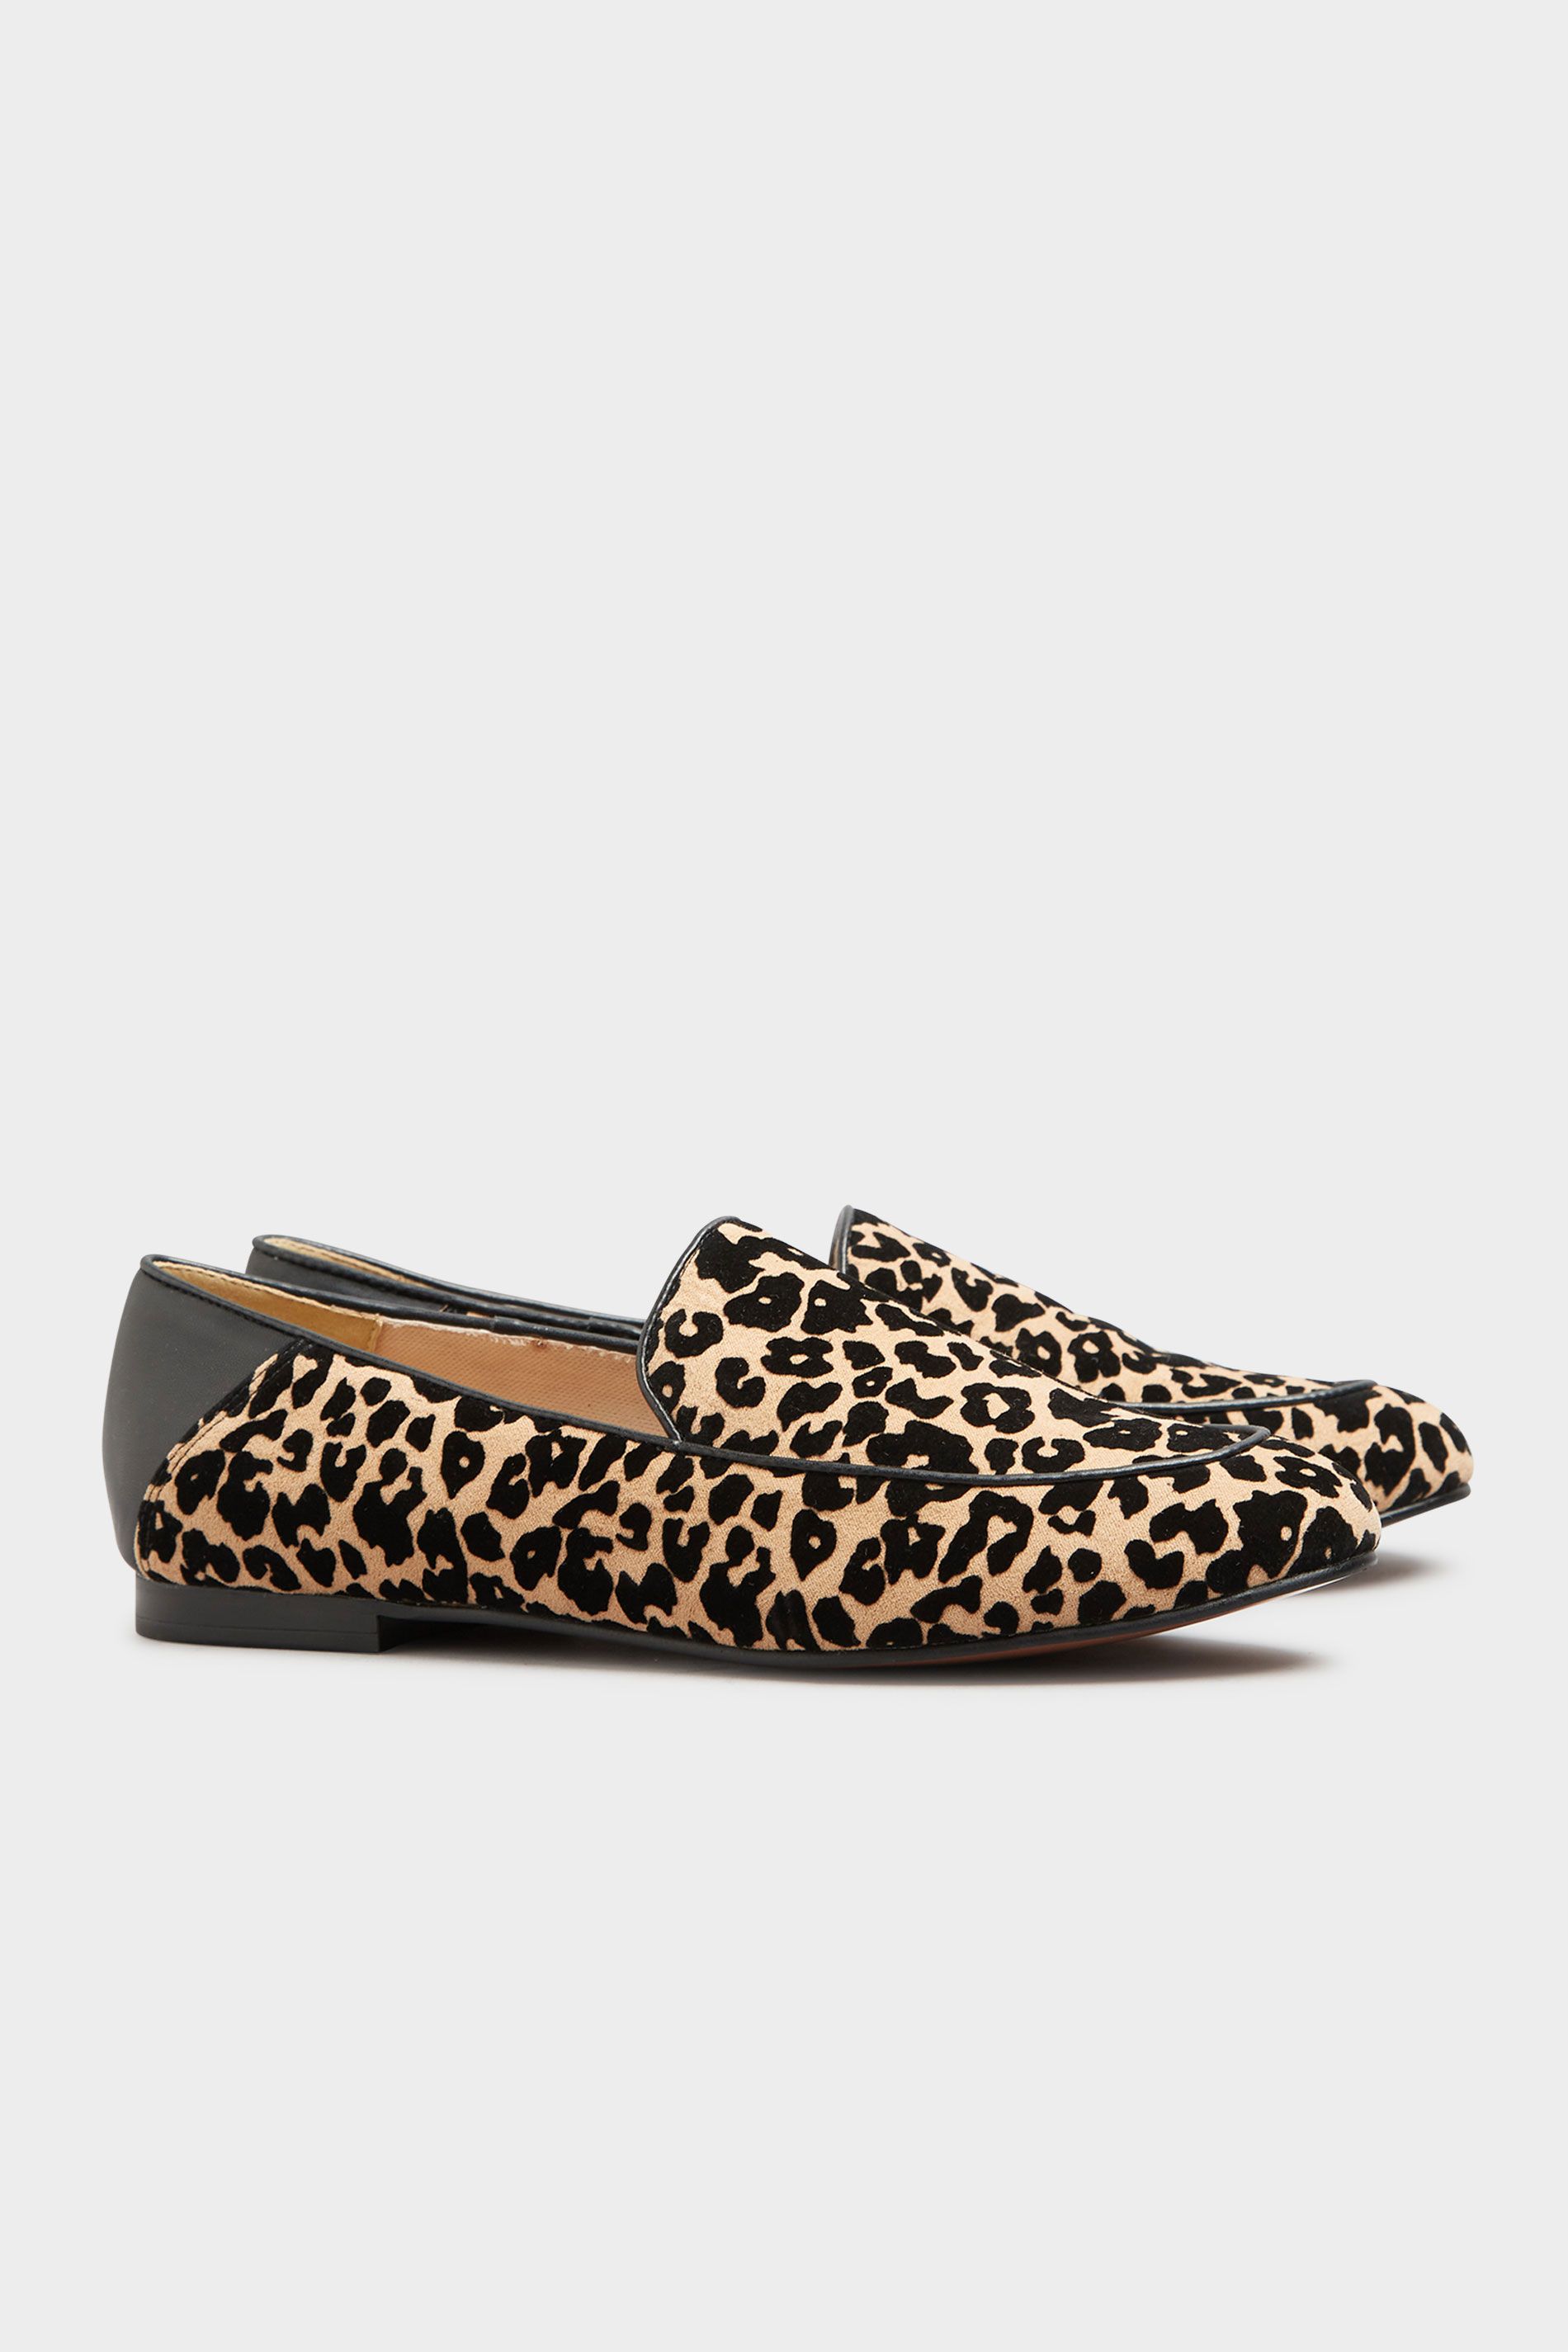 LTS Beige Brown Leopard Print Suede Loafers | Long Tall Sally | Long Tall Sally